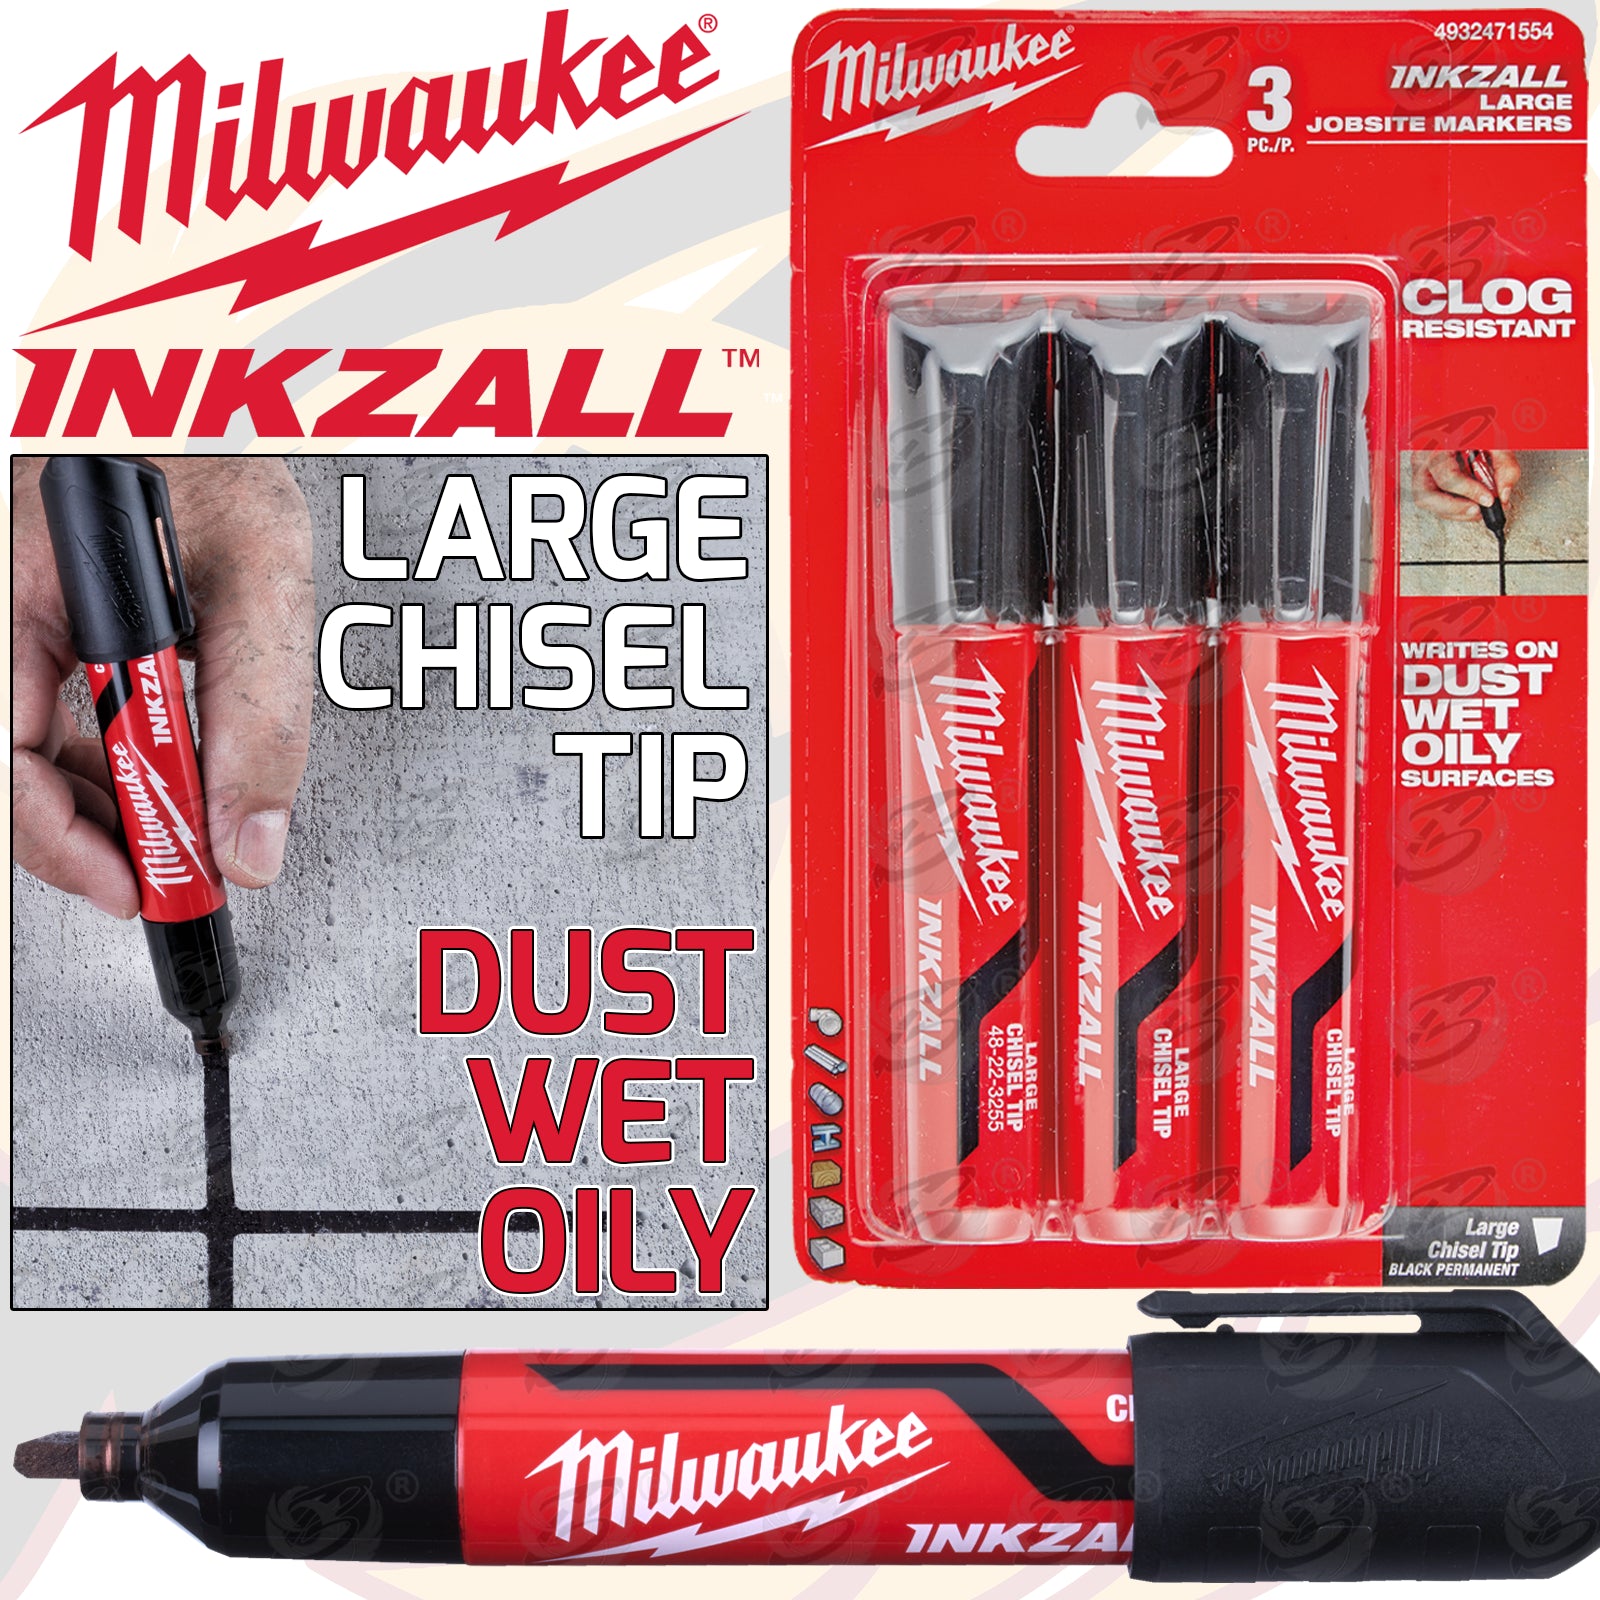 New Milwaukee Inkzall Chisel-Tip Markers, Large and XL